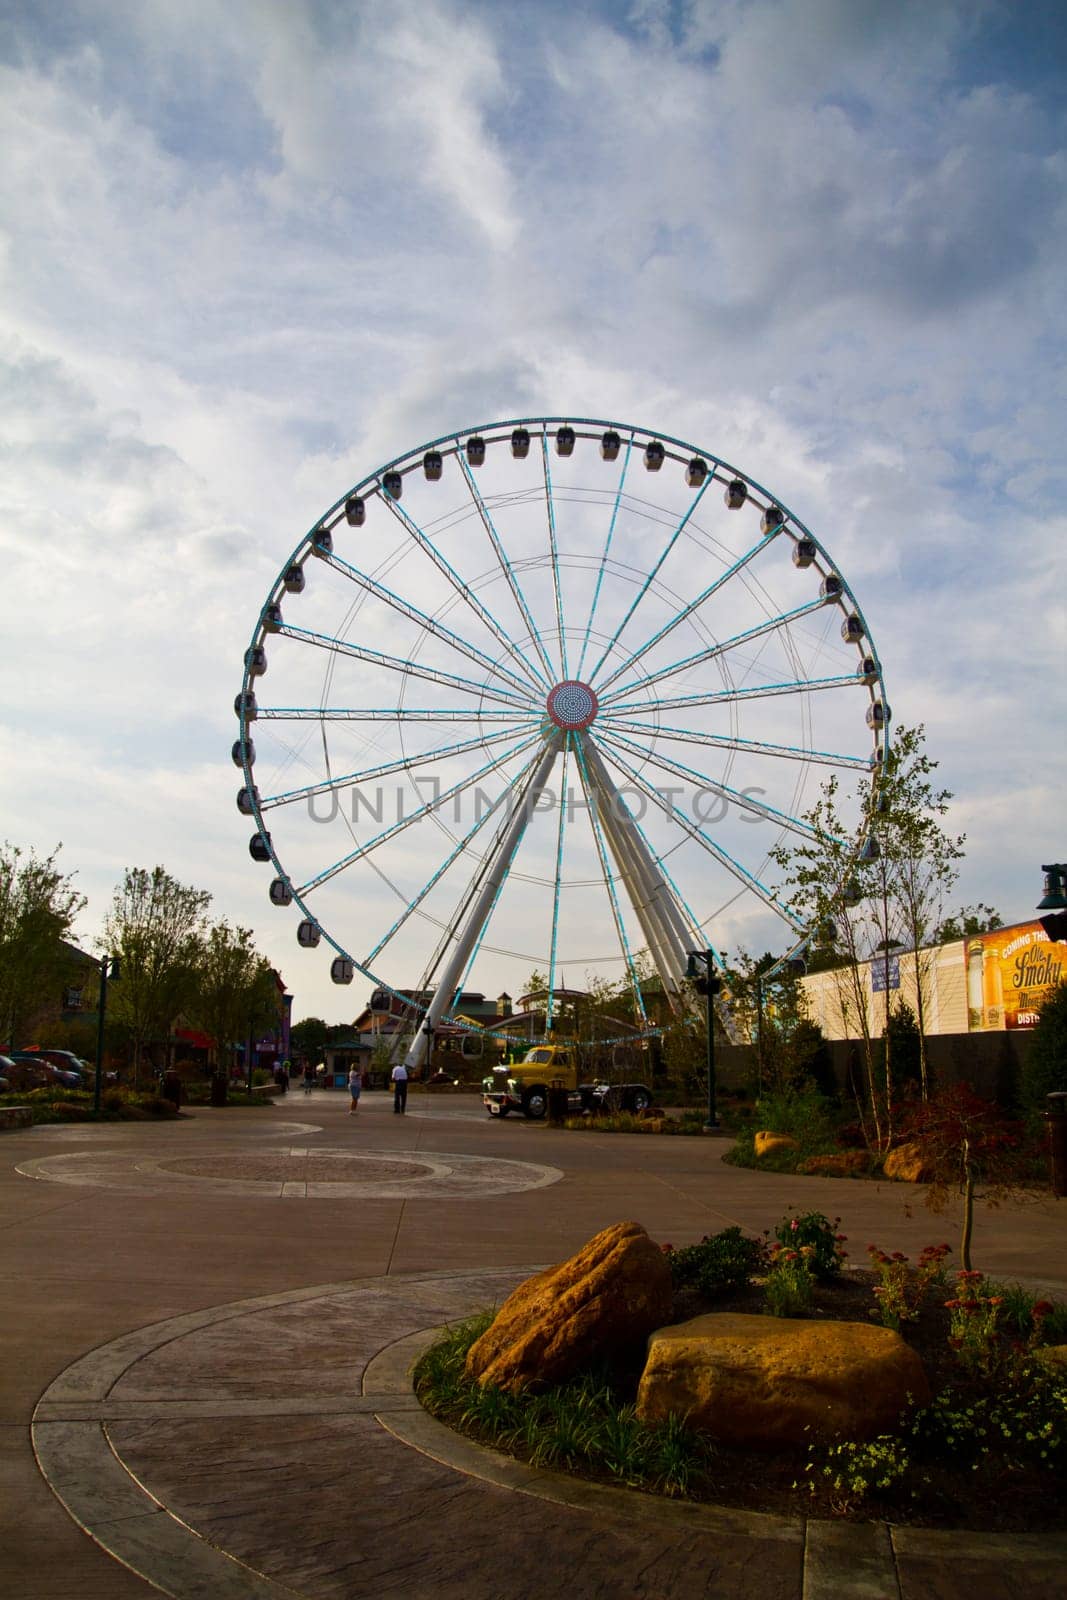 Experience the thrill of a towering Ferris wheel in Gatlinburg, Tennessee's lively leisure park. This iconic landmark offers family-friendly entertainment and breathtaking views against a partly cloudy sky.